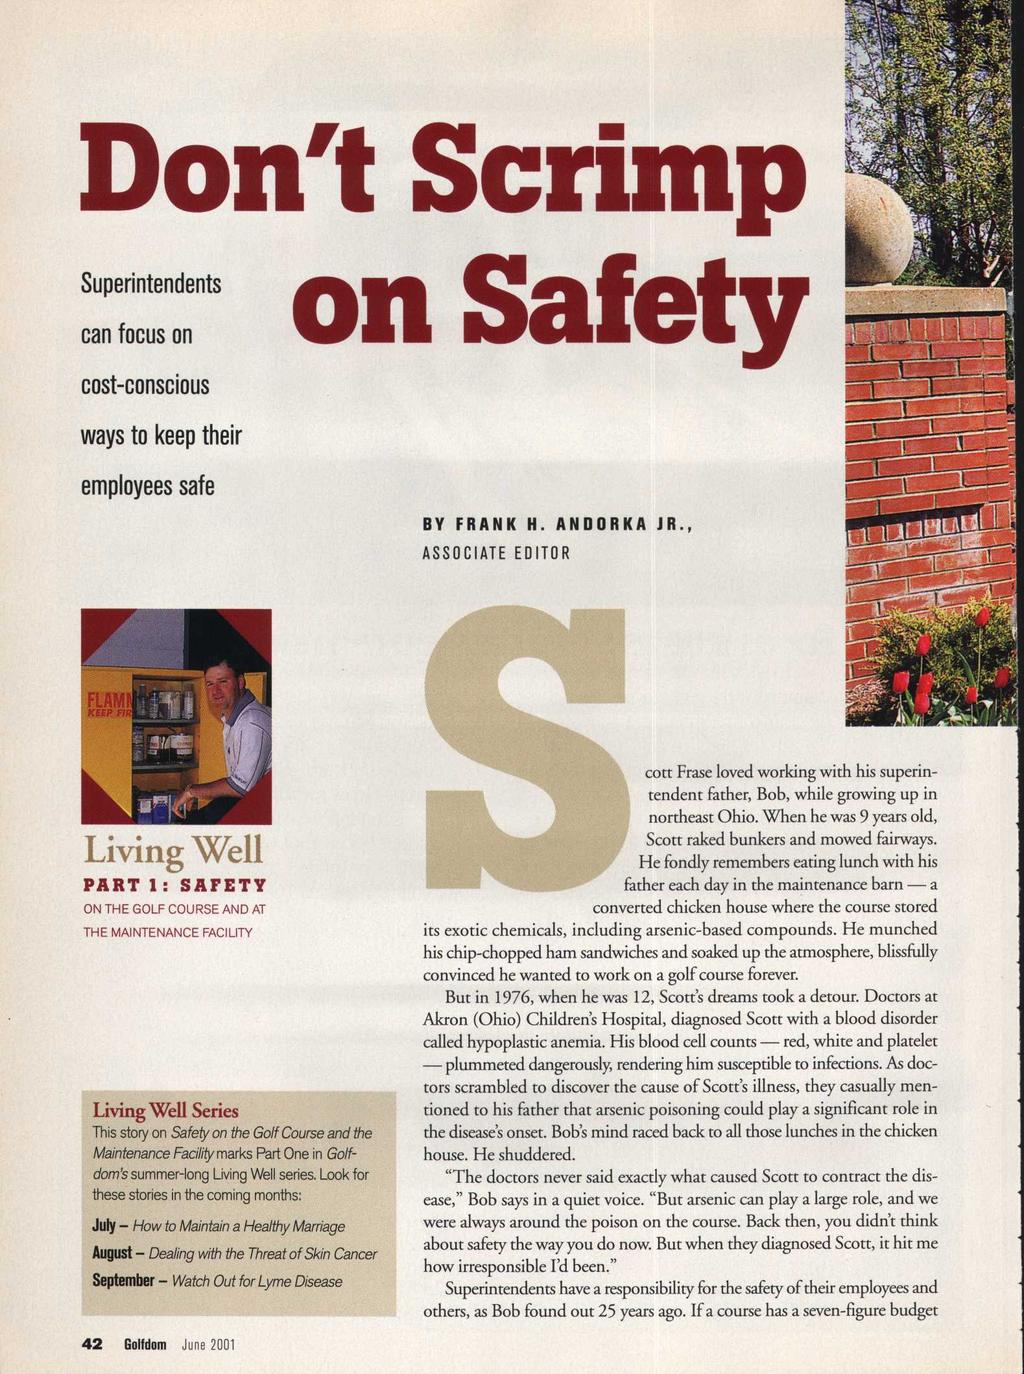 Don't Scrimp Superintendents can focus on on Safety cost-conscious ways to keep their employees safe BY FRANK H. ANDORRA JR.